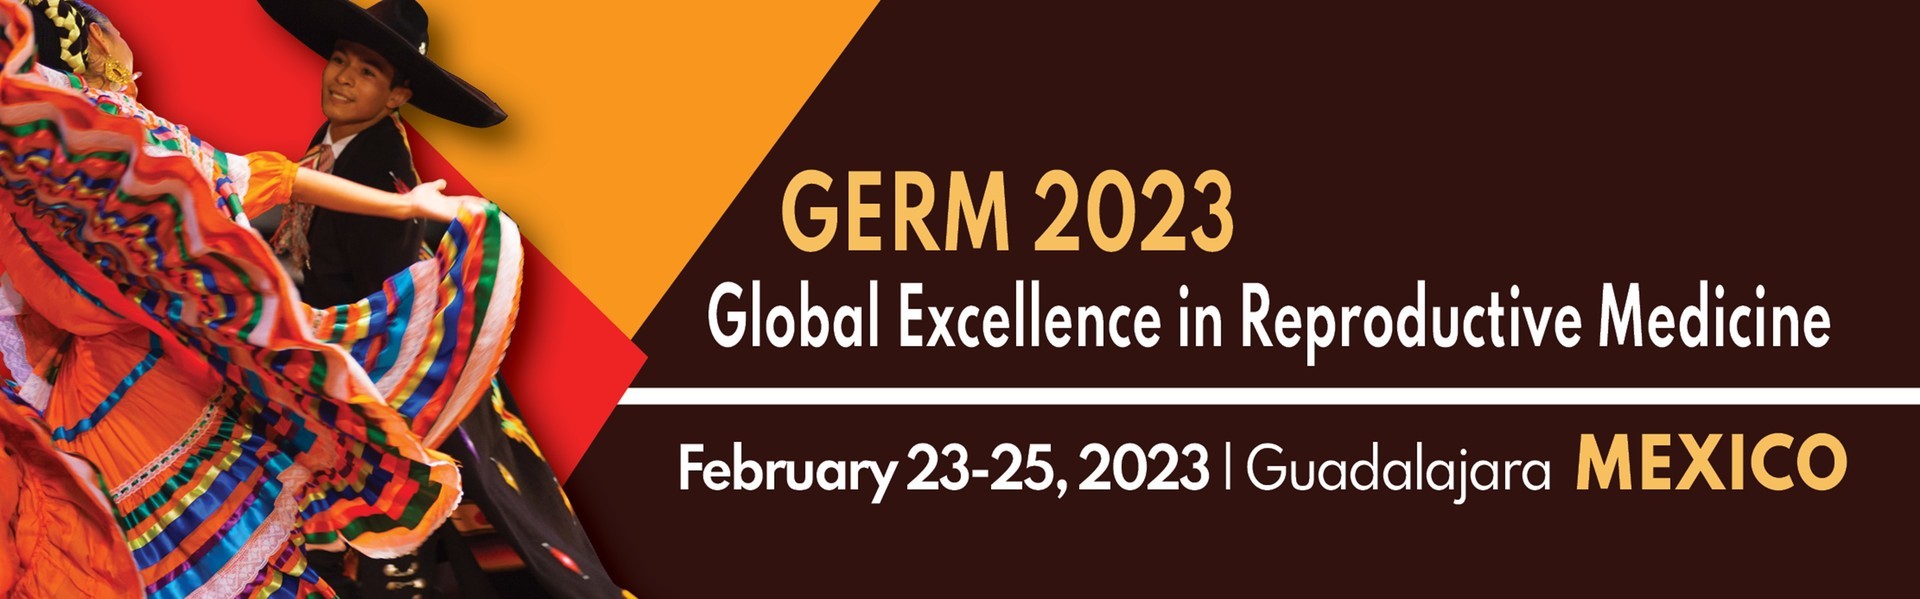 GERM 2023 - the Global Excellence in Reproductive Medicine